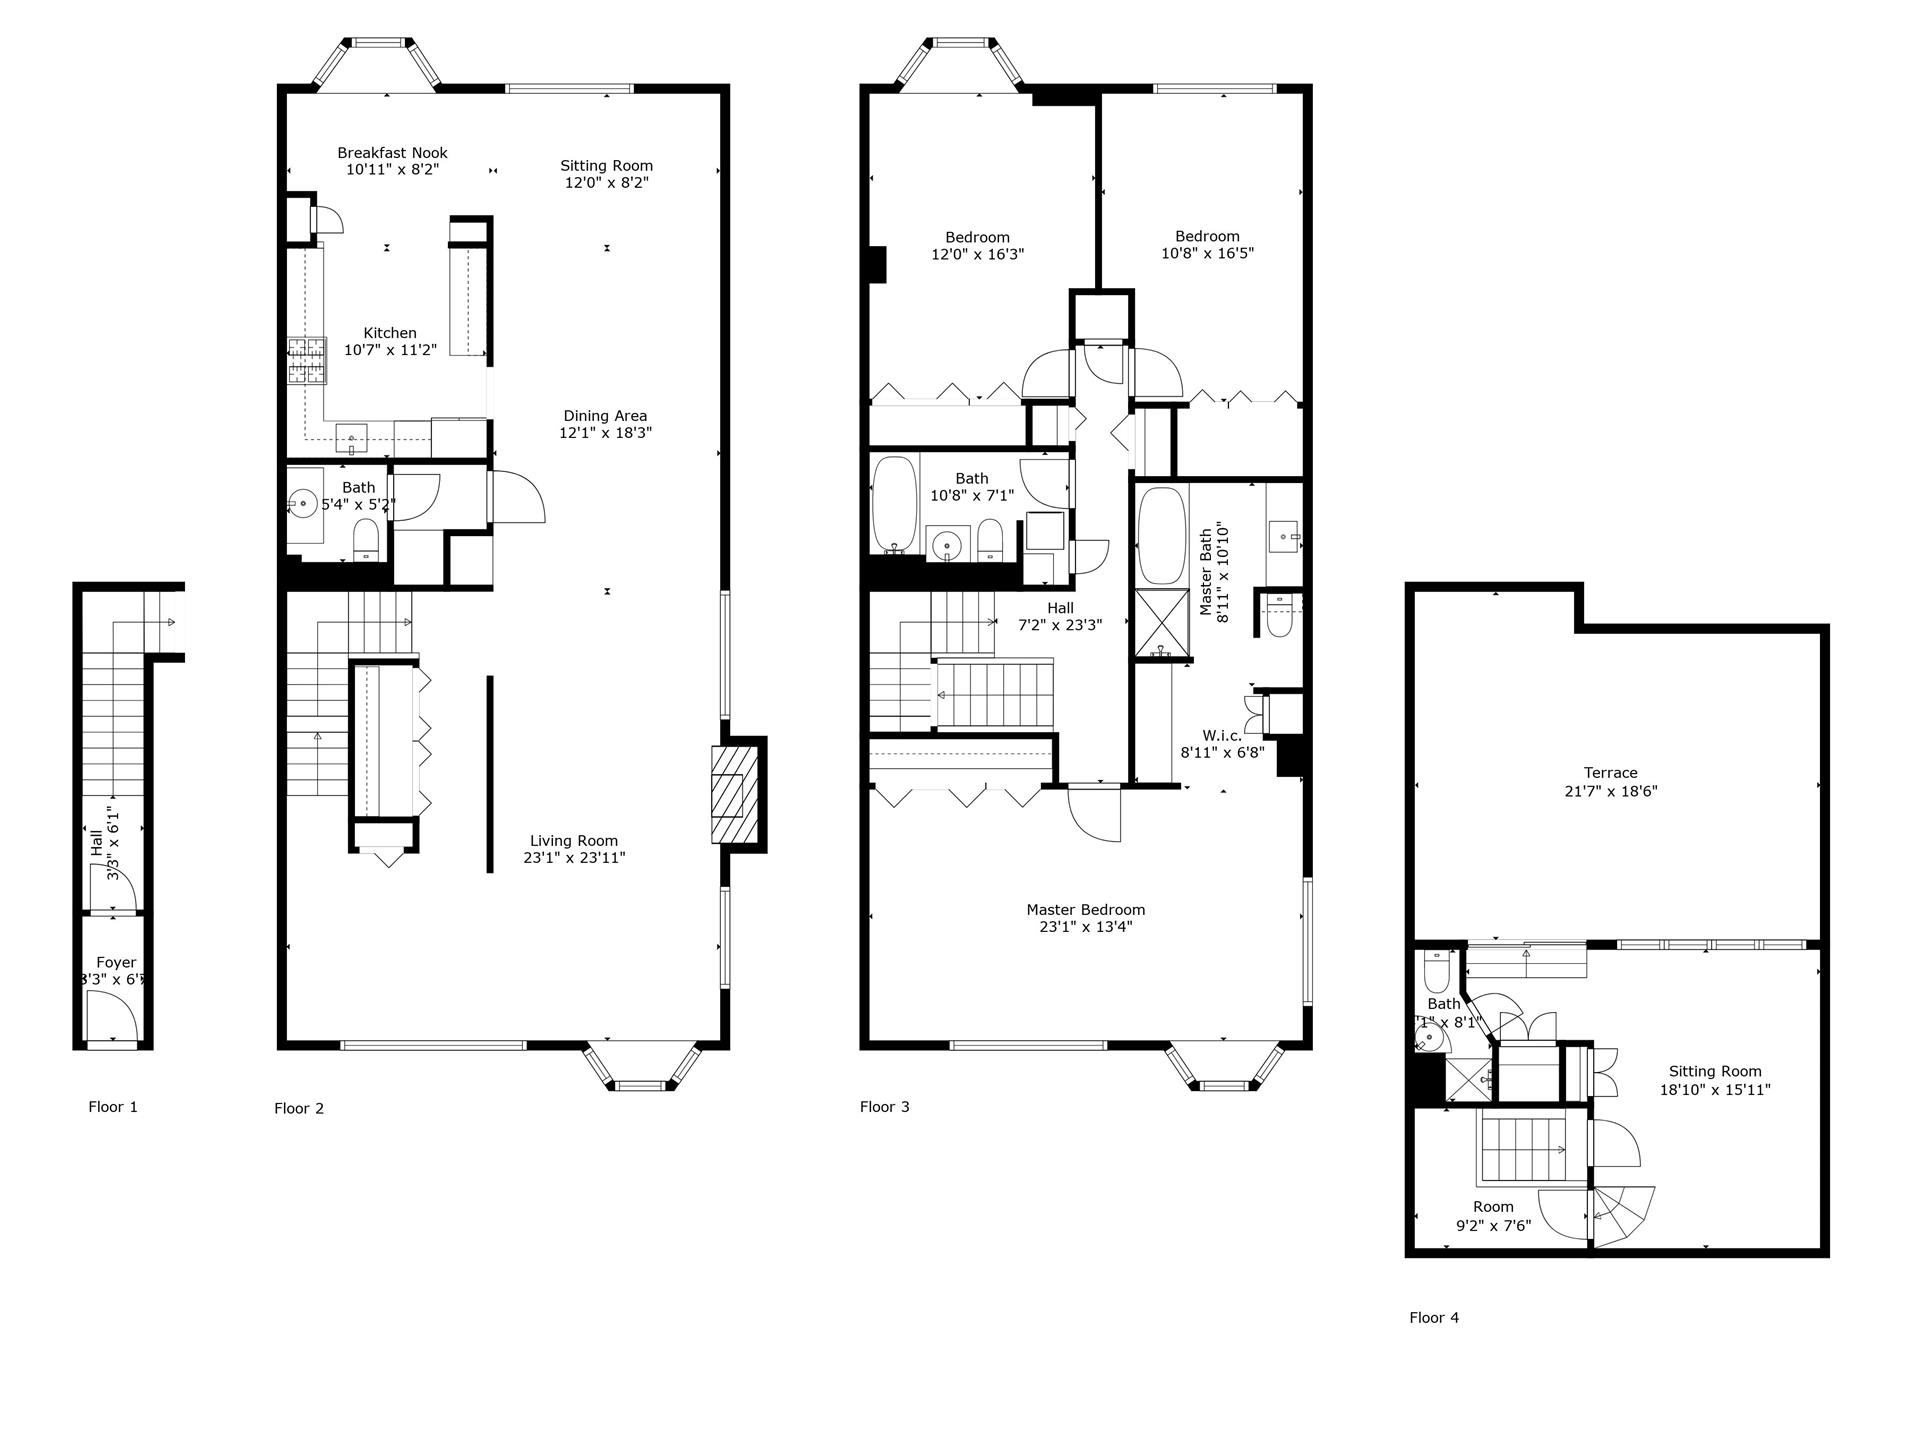 Floorplan for 1400 5th Avenue, THE2